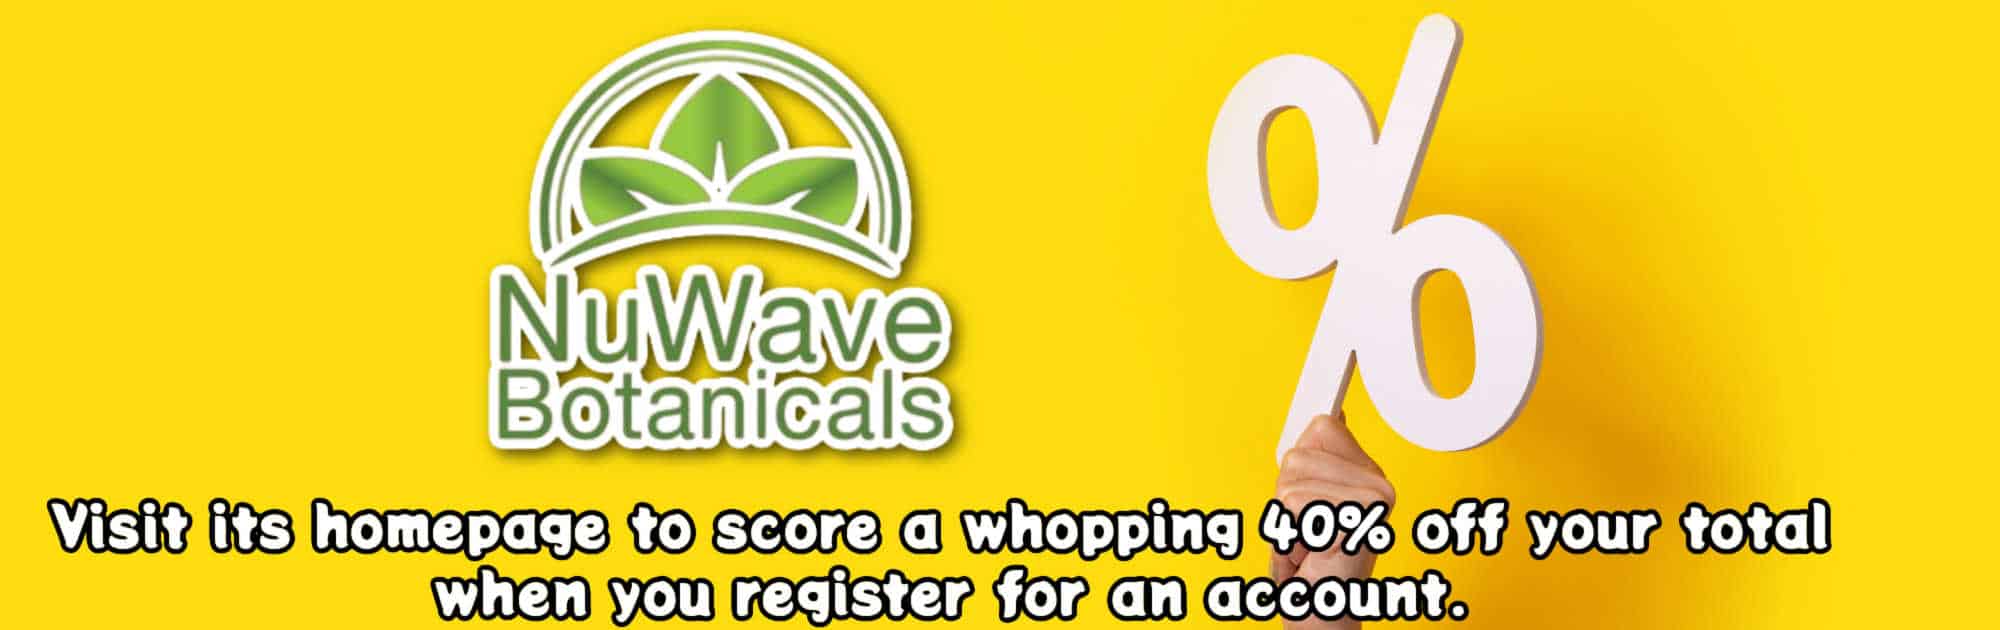 image of nuwave botanicals coupon code and discounts